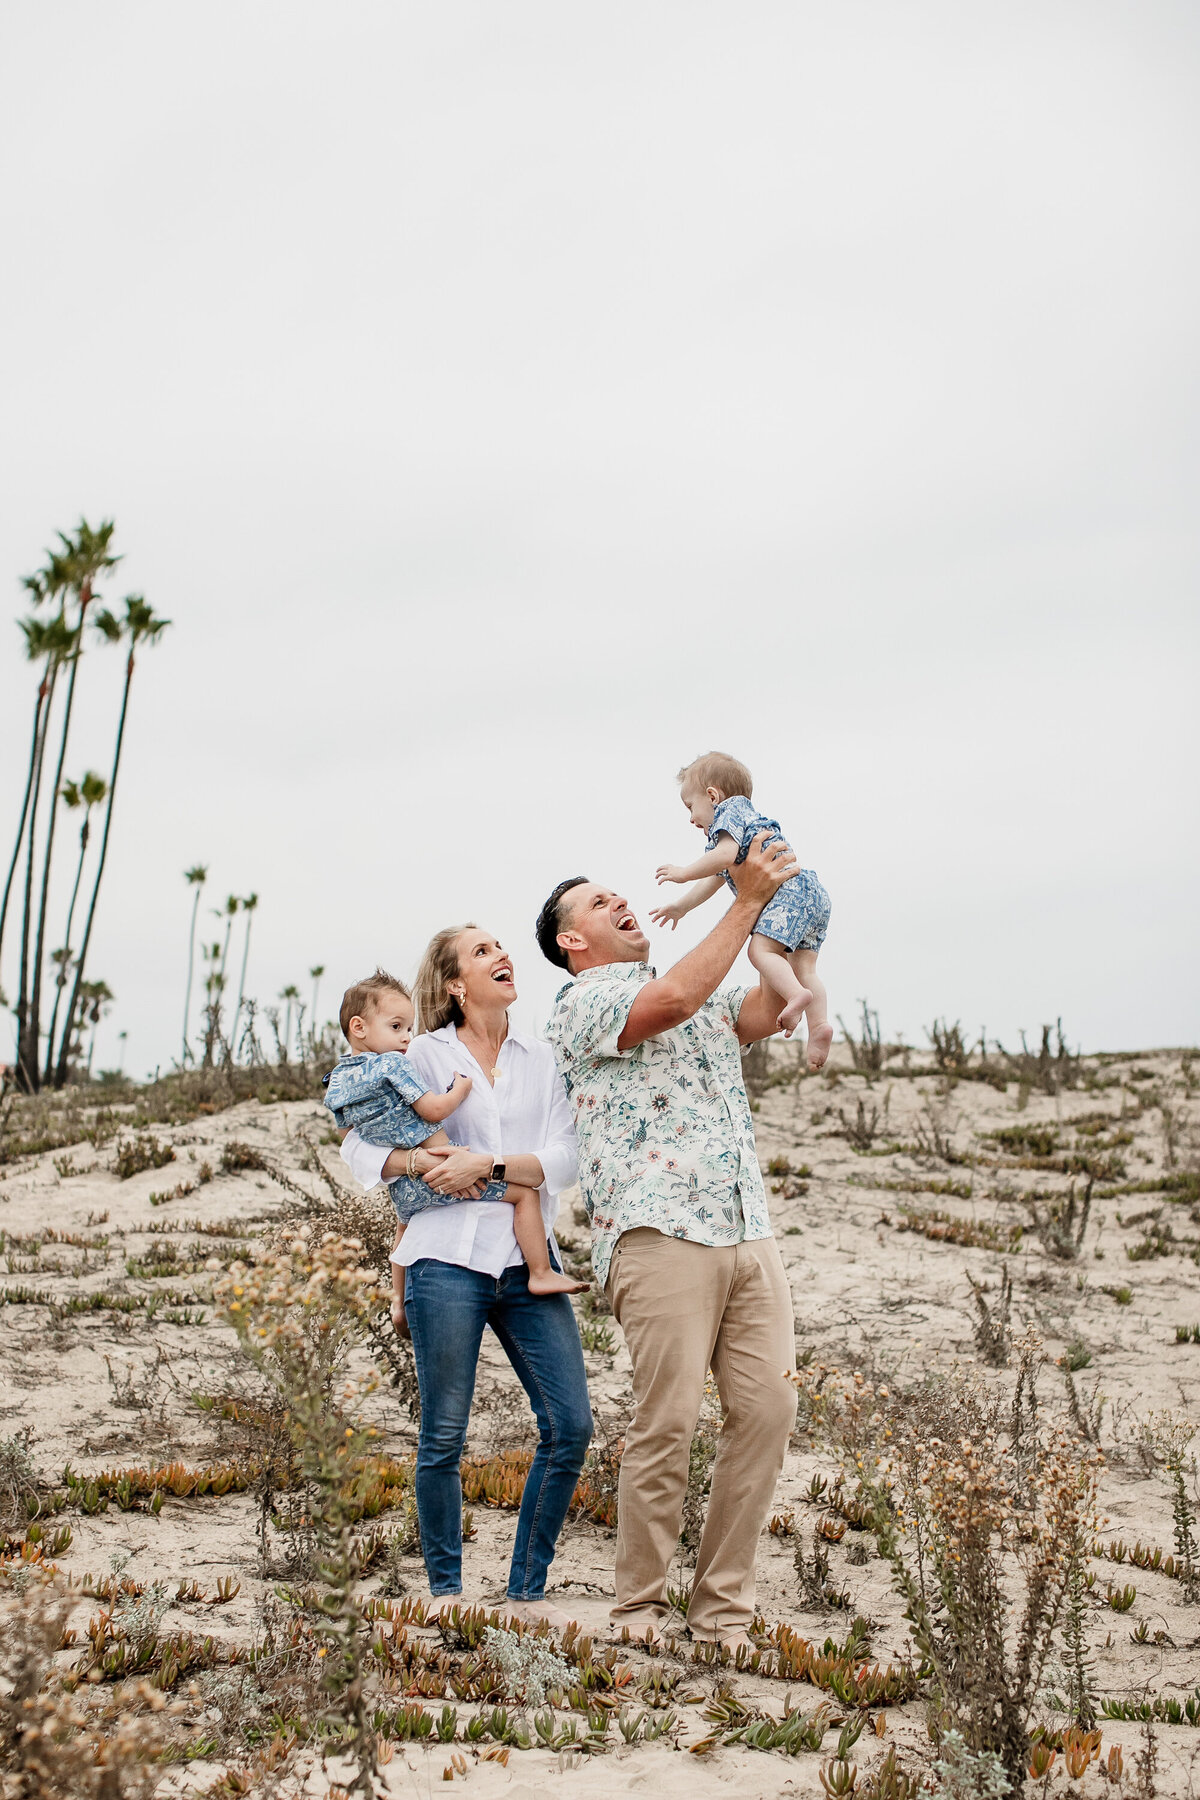 Archer Inspired Photography - Fehmel Family - Mini Session-13